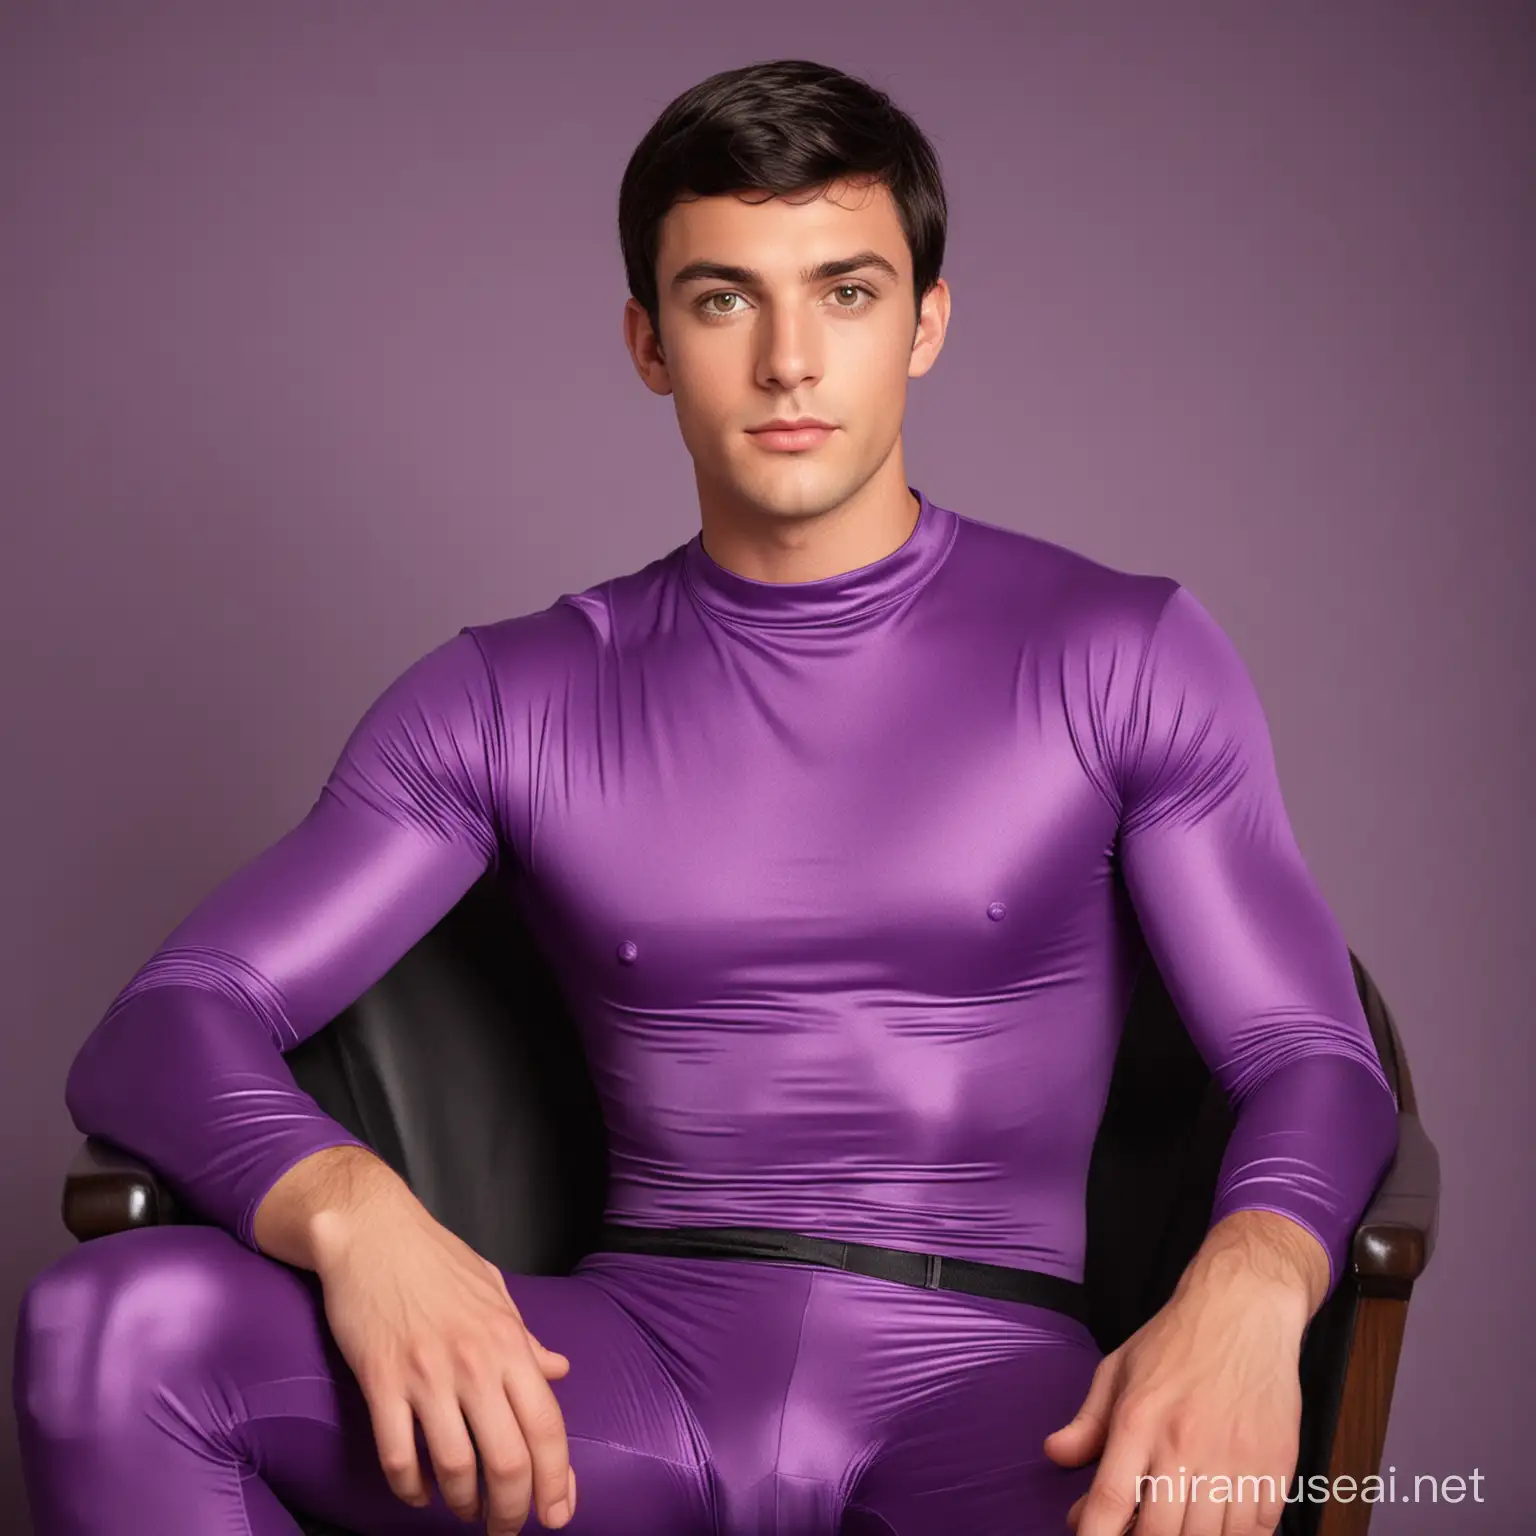 Picture of handsome dorky  27 year old 1960s American man, with short black hair, hazel eyes; wearing full amethyst hero spandex bodysuit, sitting in chair.